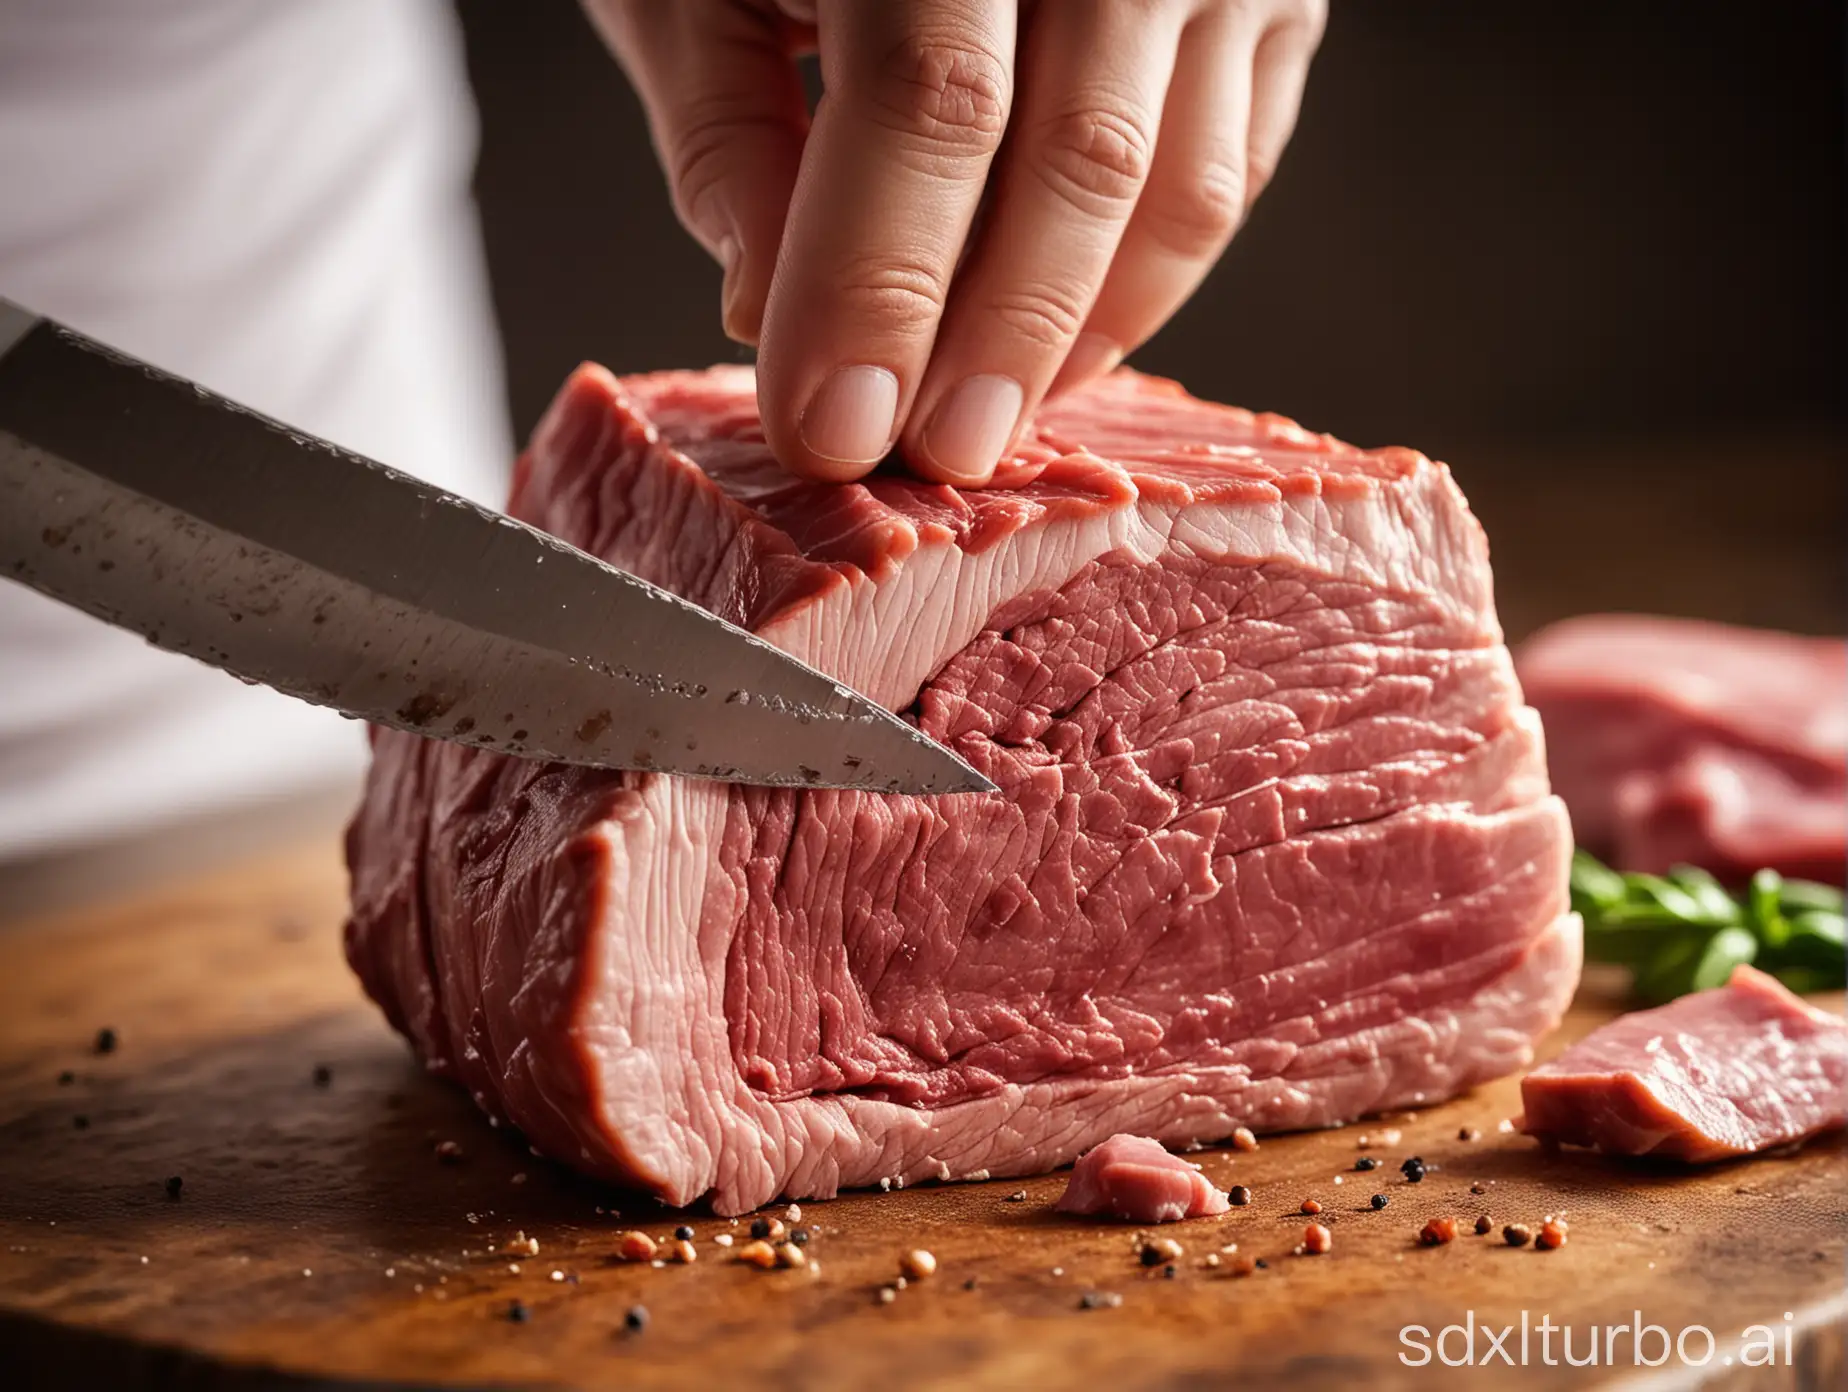 A close-up of a chef's knife cutting through a piece of meat. The knife is sharp and the meat is fresh. The background is blurred, so the focus is on the knife and the meat.